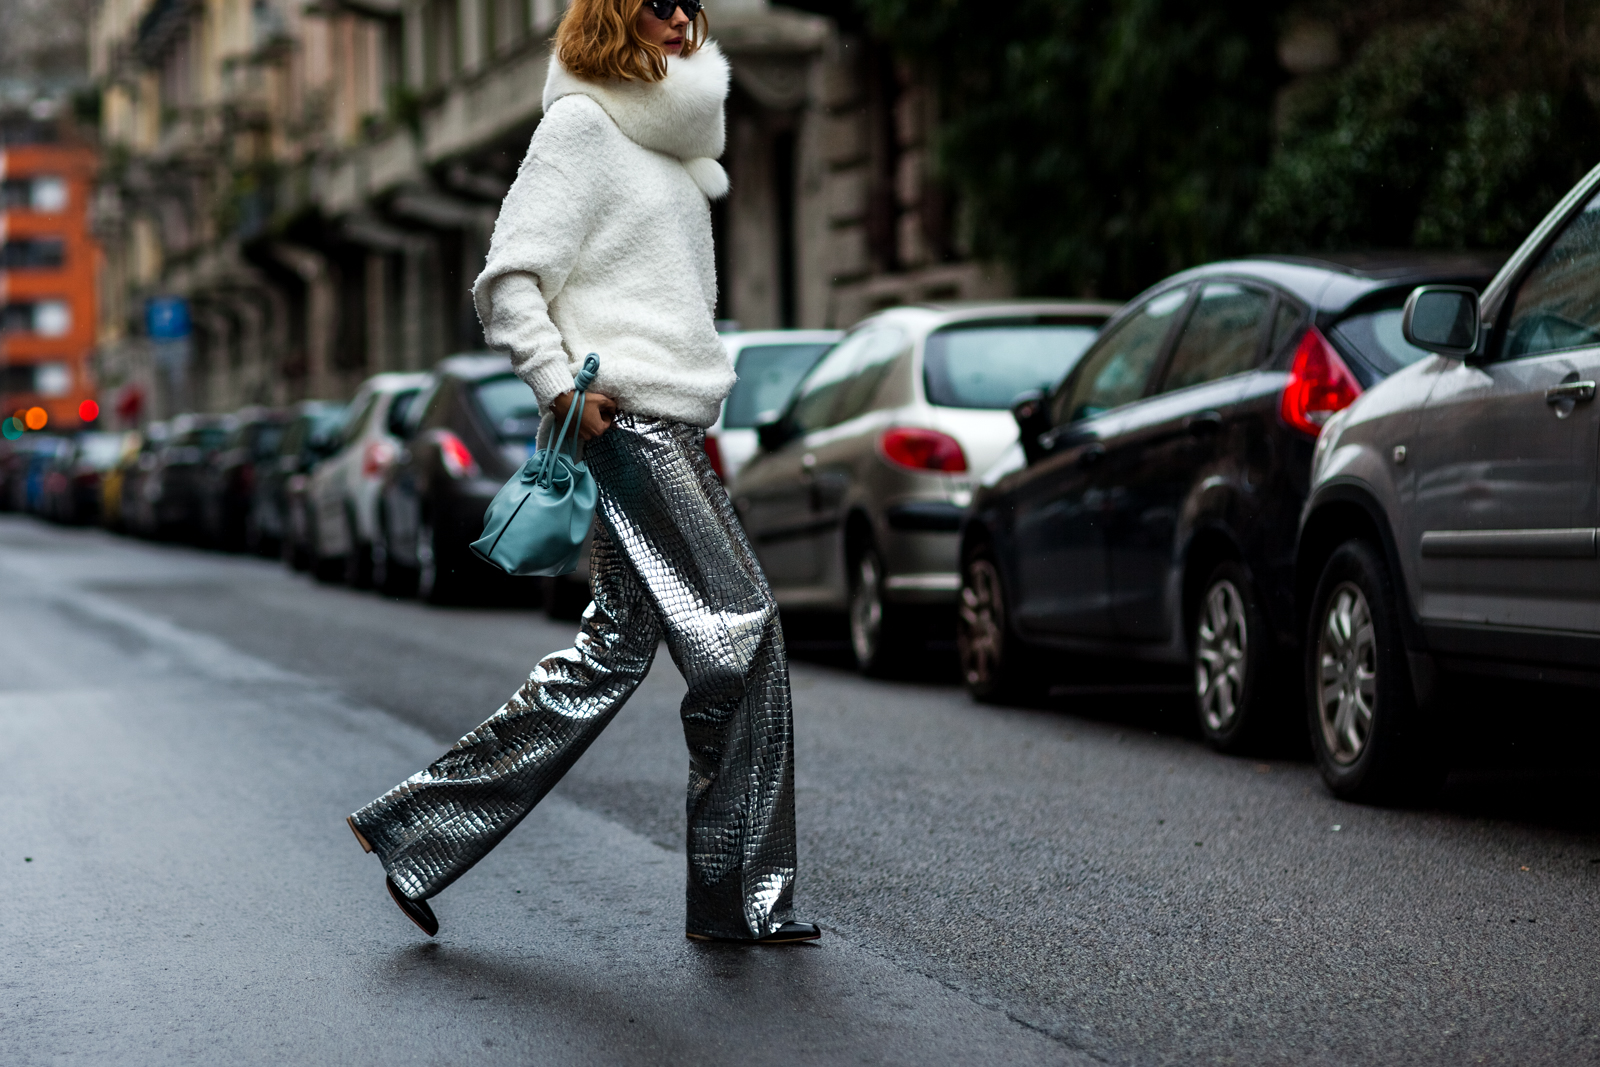 Candela Novembre wearing a white sweater and Loewe metallic leather pants before a show in Milan, Italy